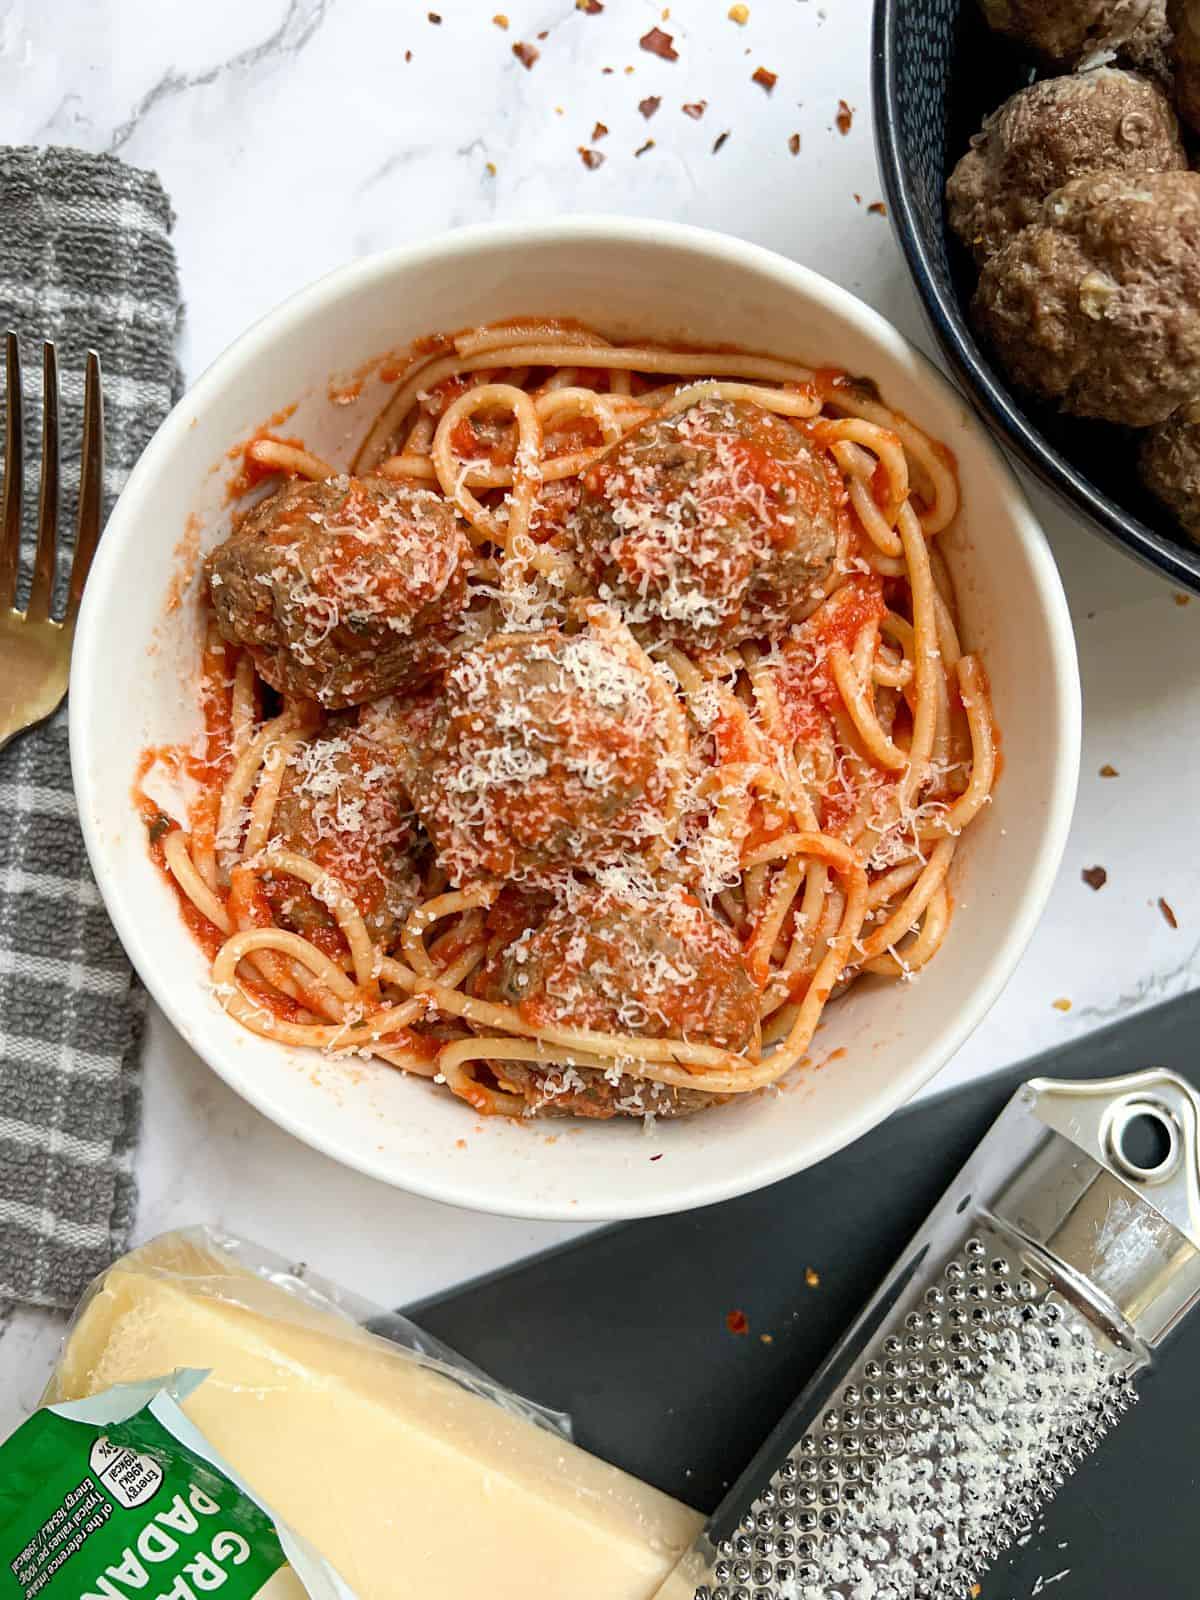 A bowl of spaghetti and meatballs with parmesan and a grater in the background.